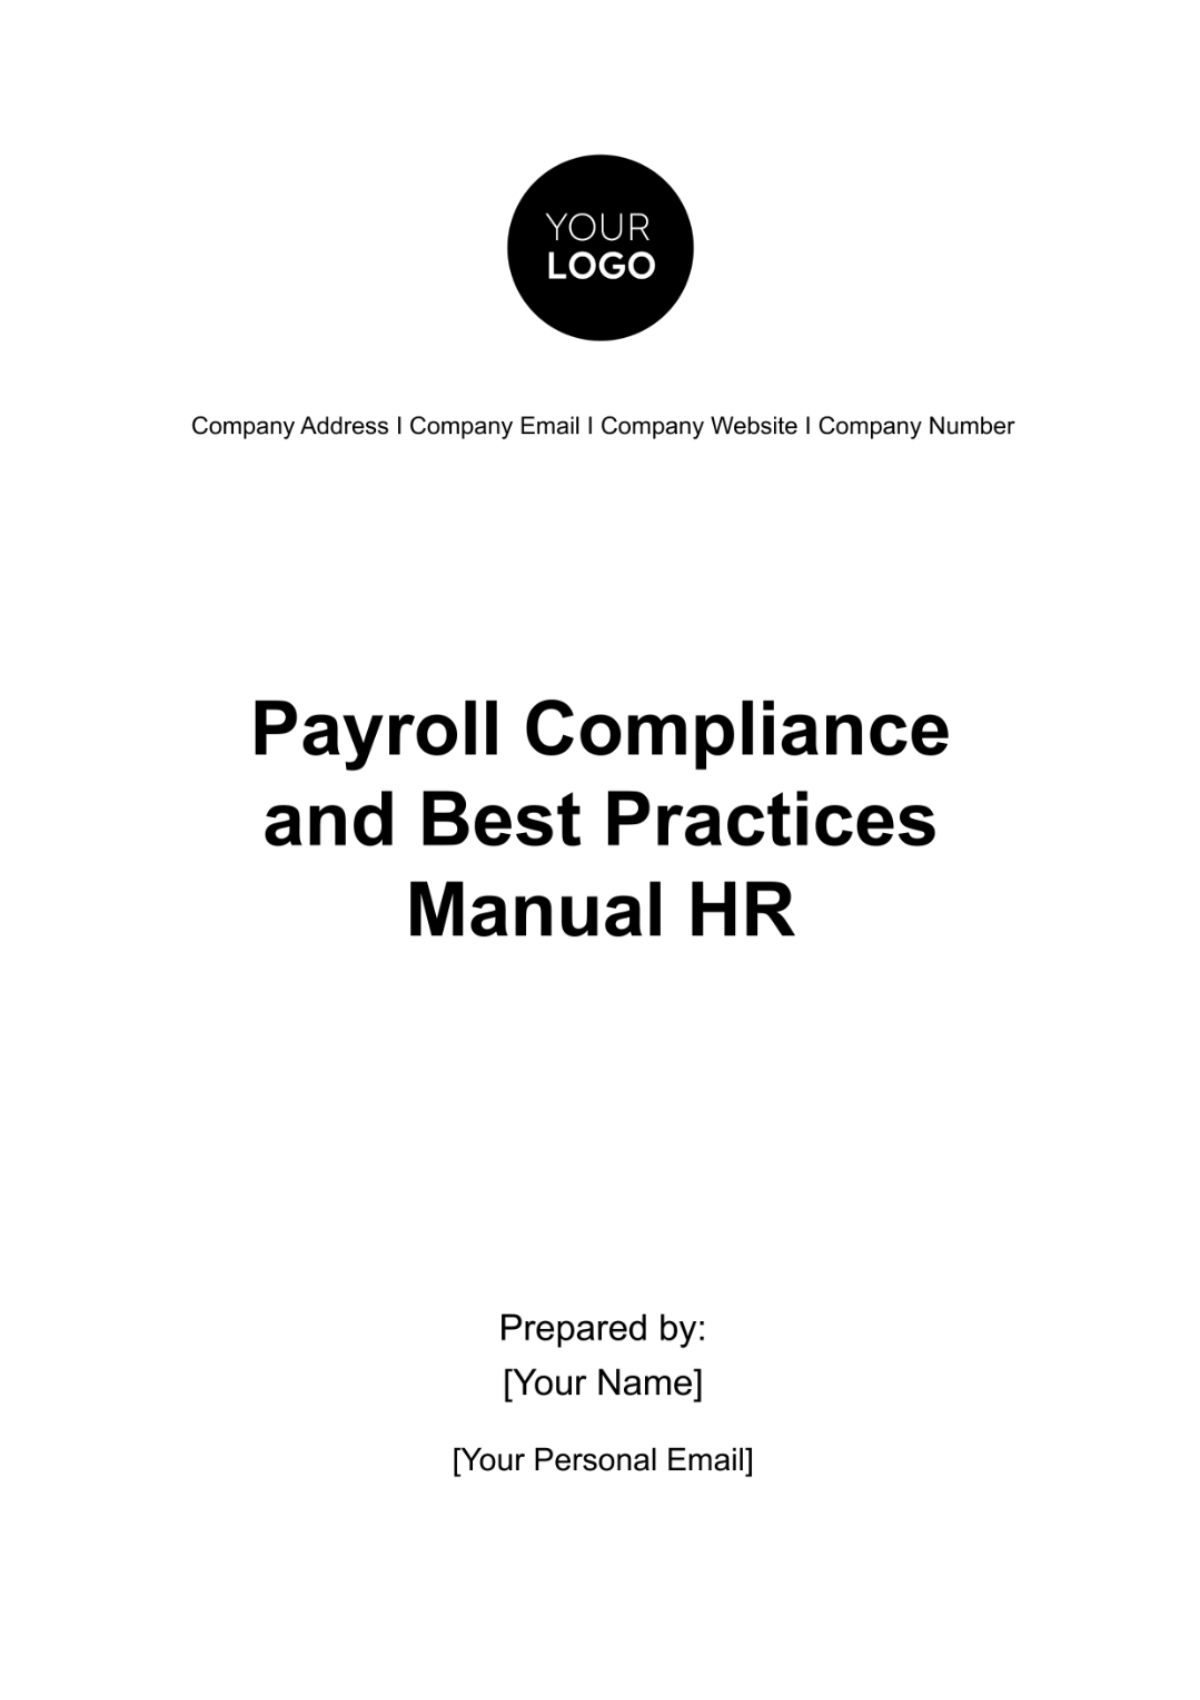 Free Payroll Compliance and Best Practices Manual HR Template